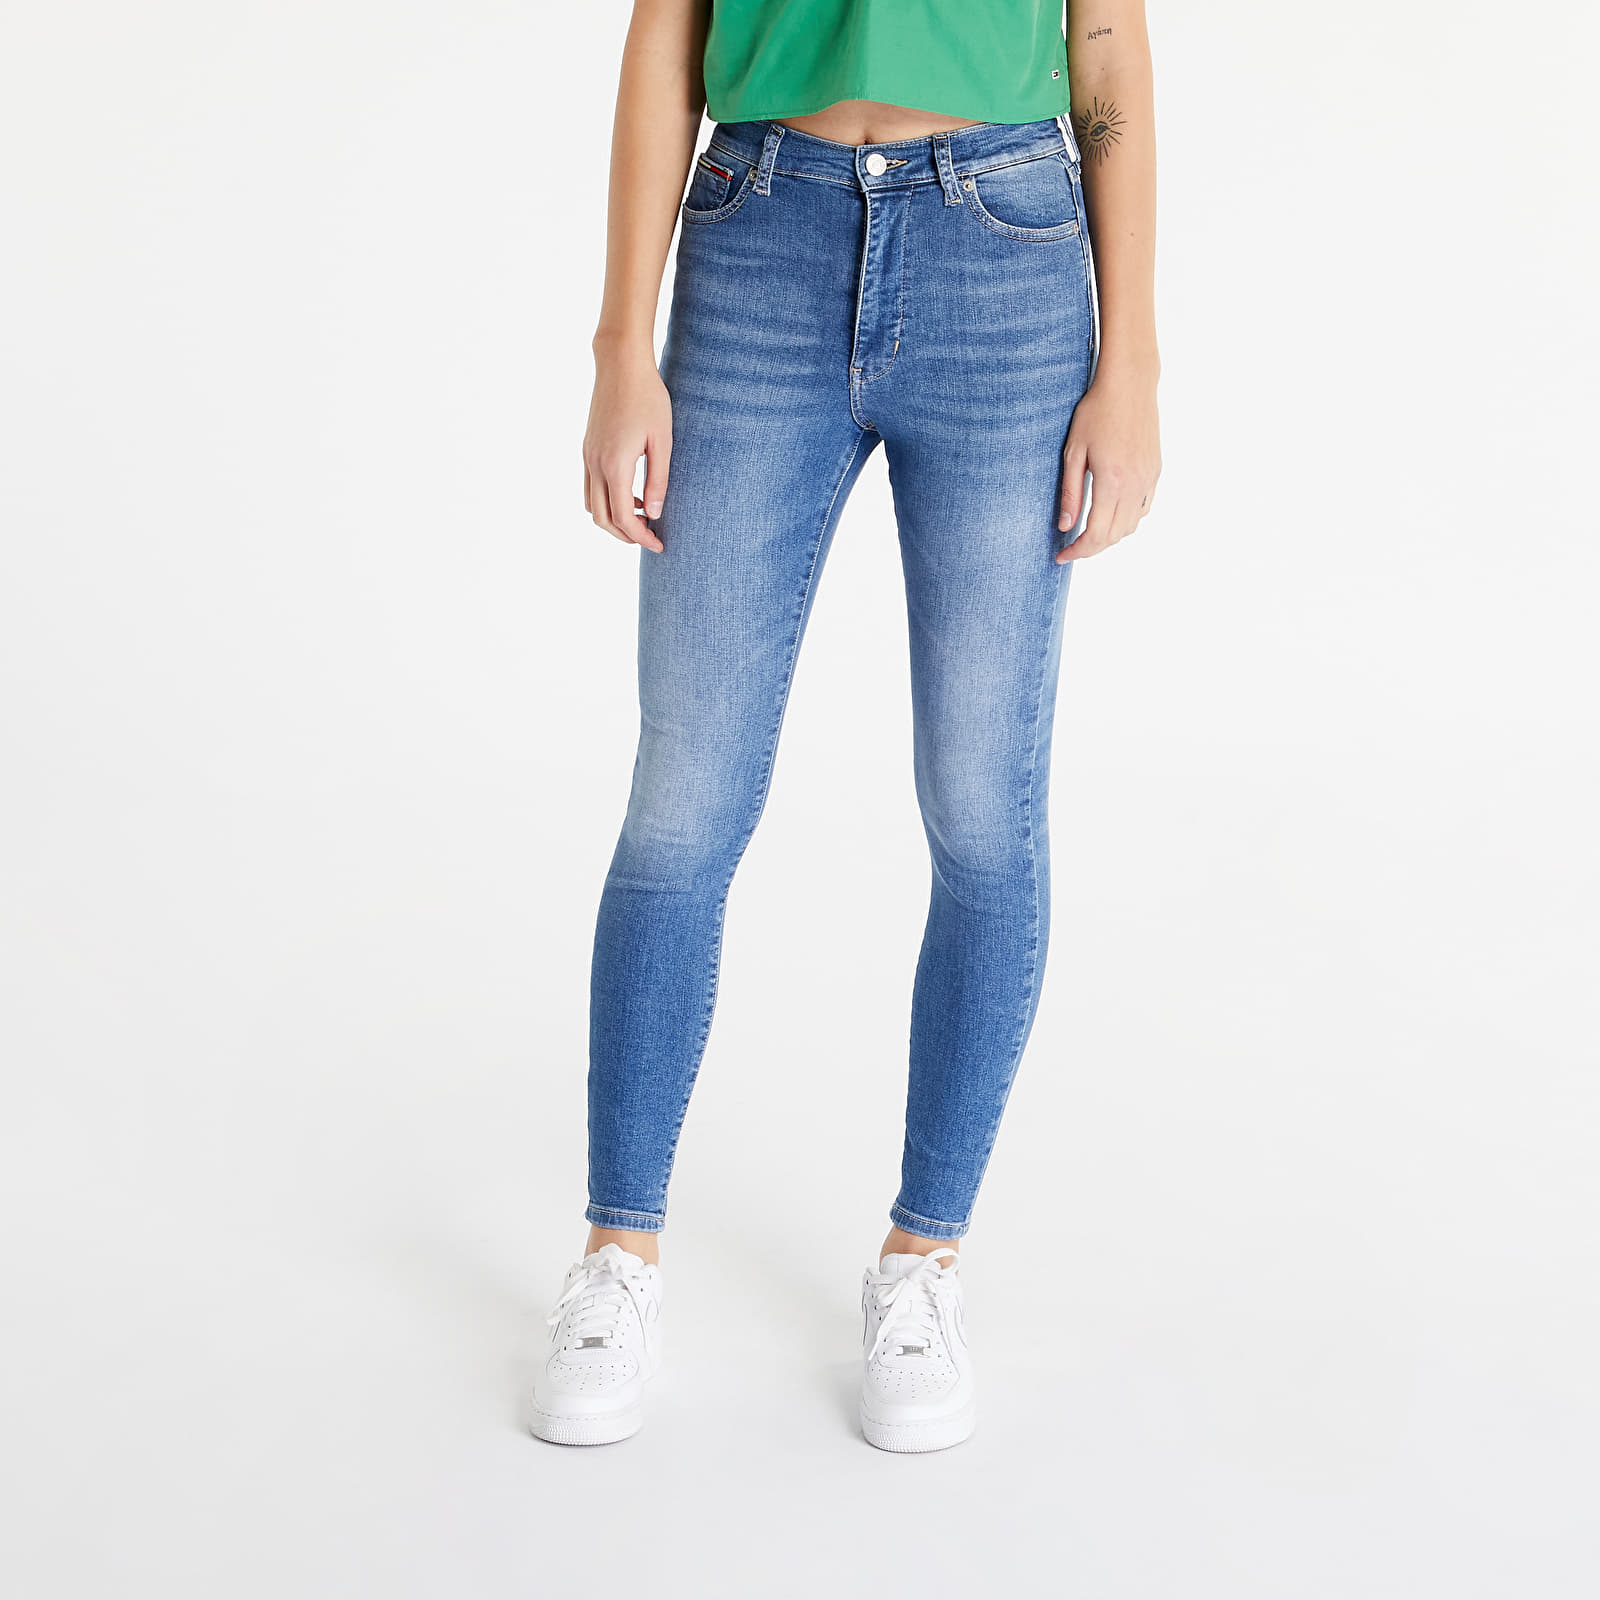 Jeans TOMMY JEANS Sylvia High Rise Super Skinny Jeans Denim Light | Queens